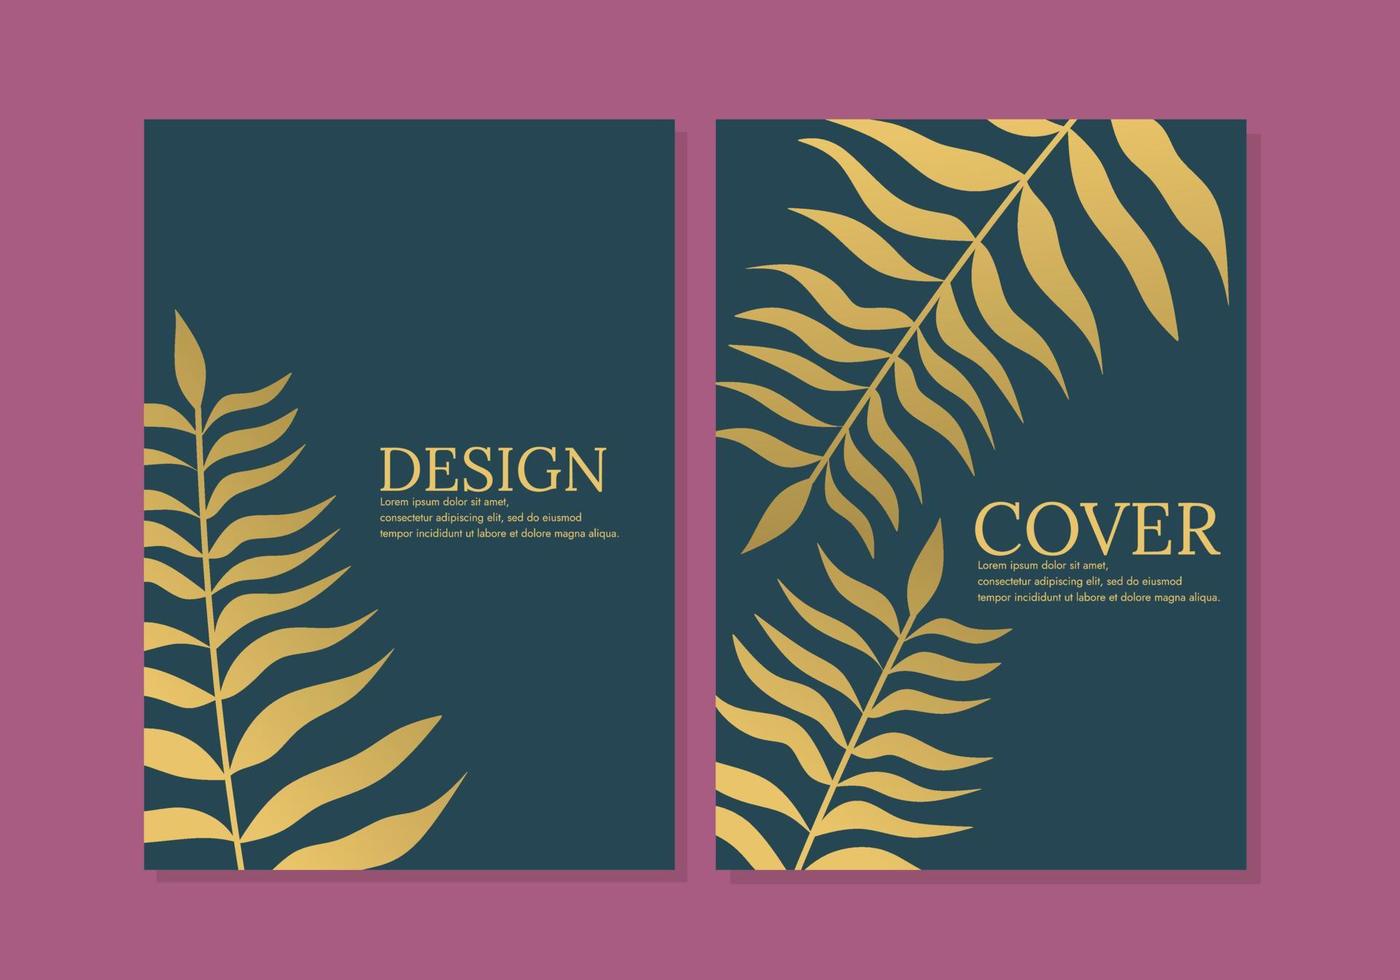 elegant botanical cover design set. navy blue and gold color background. A4 size for notebooks, journals, magazines, annual reports, invitations vector